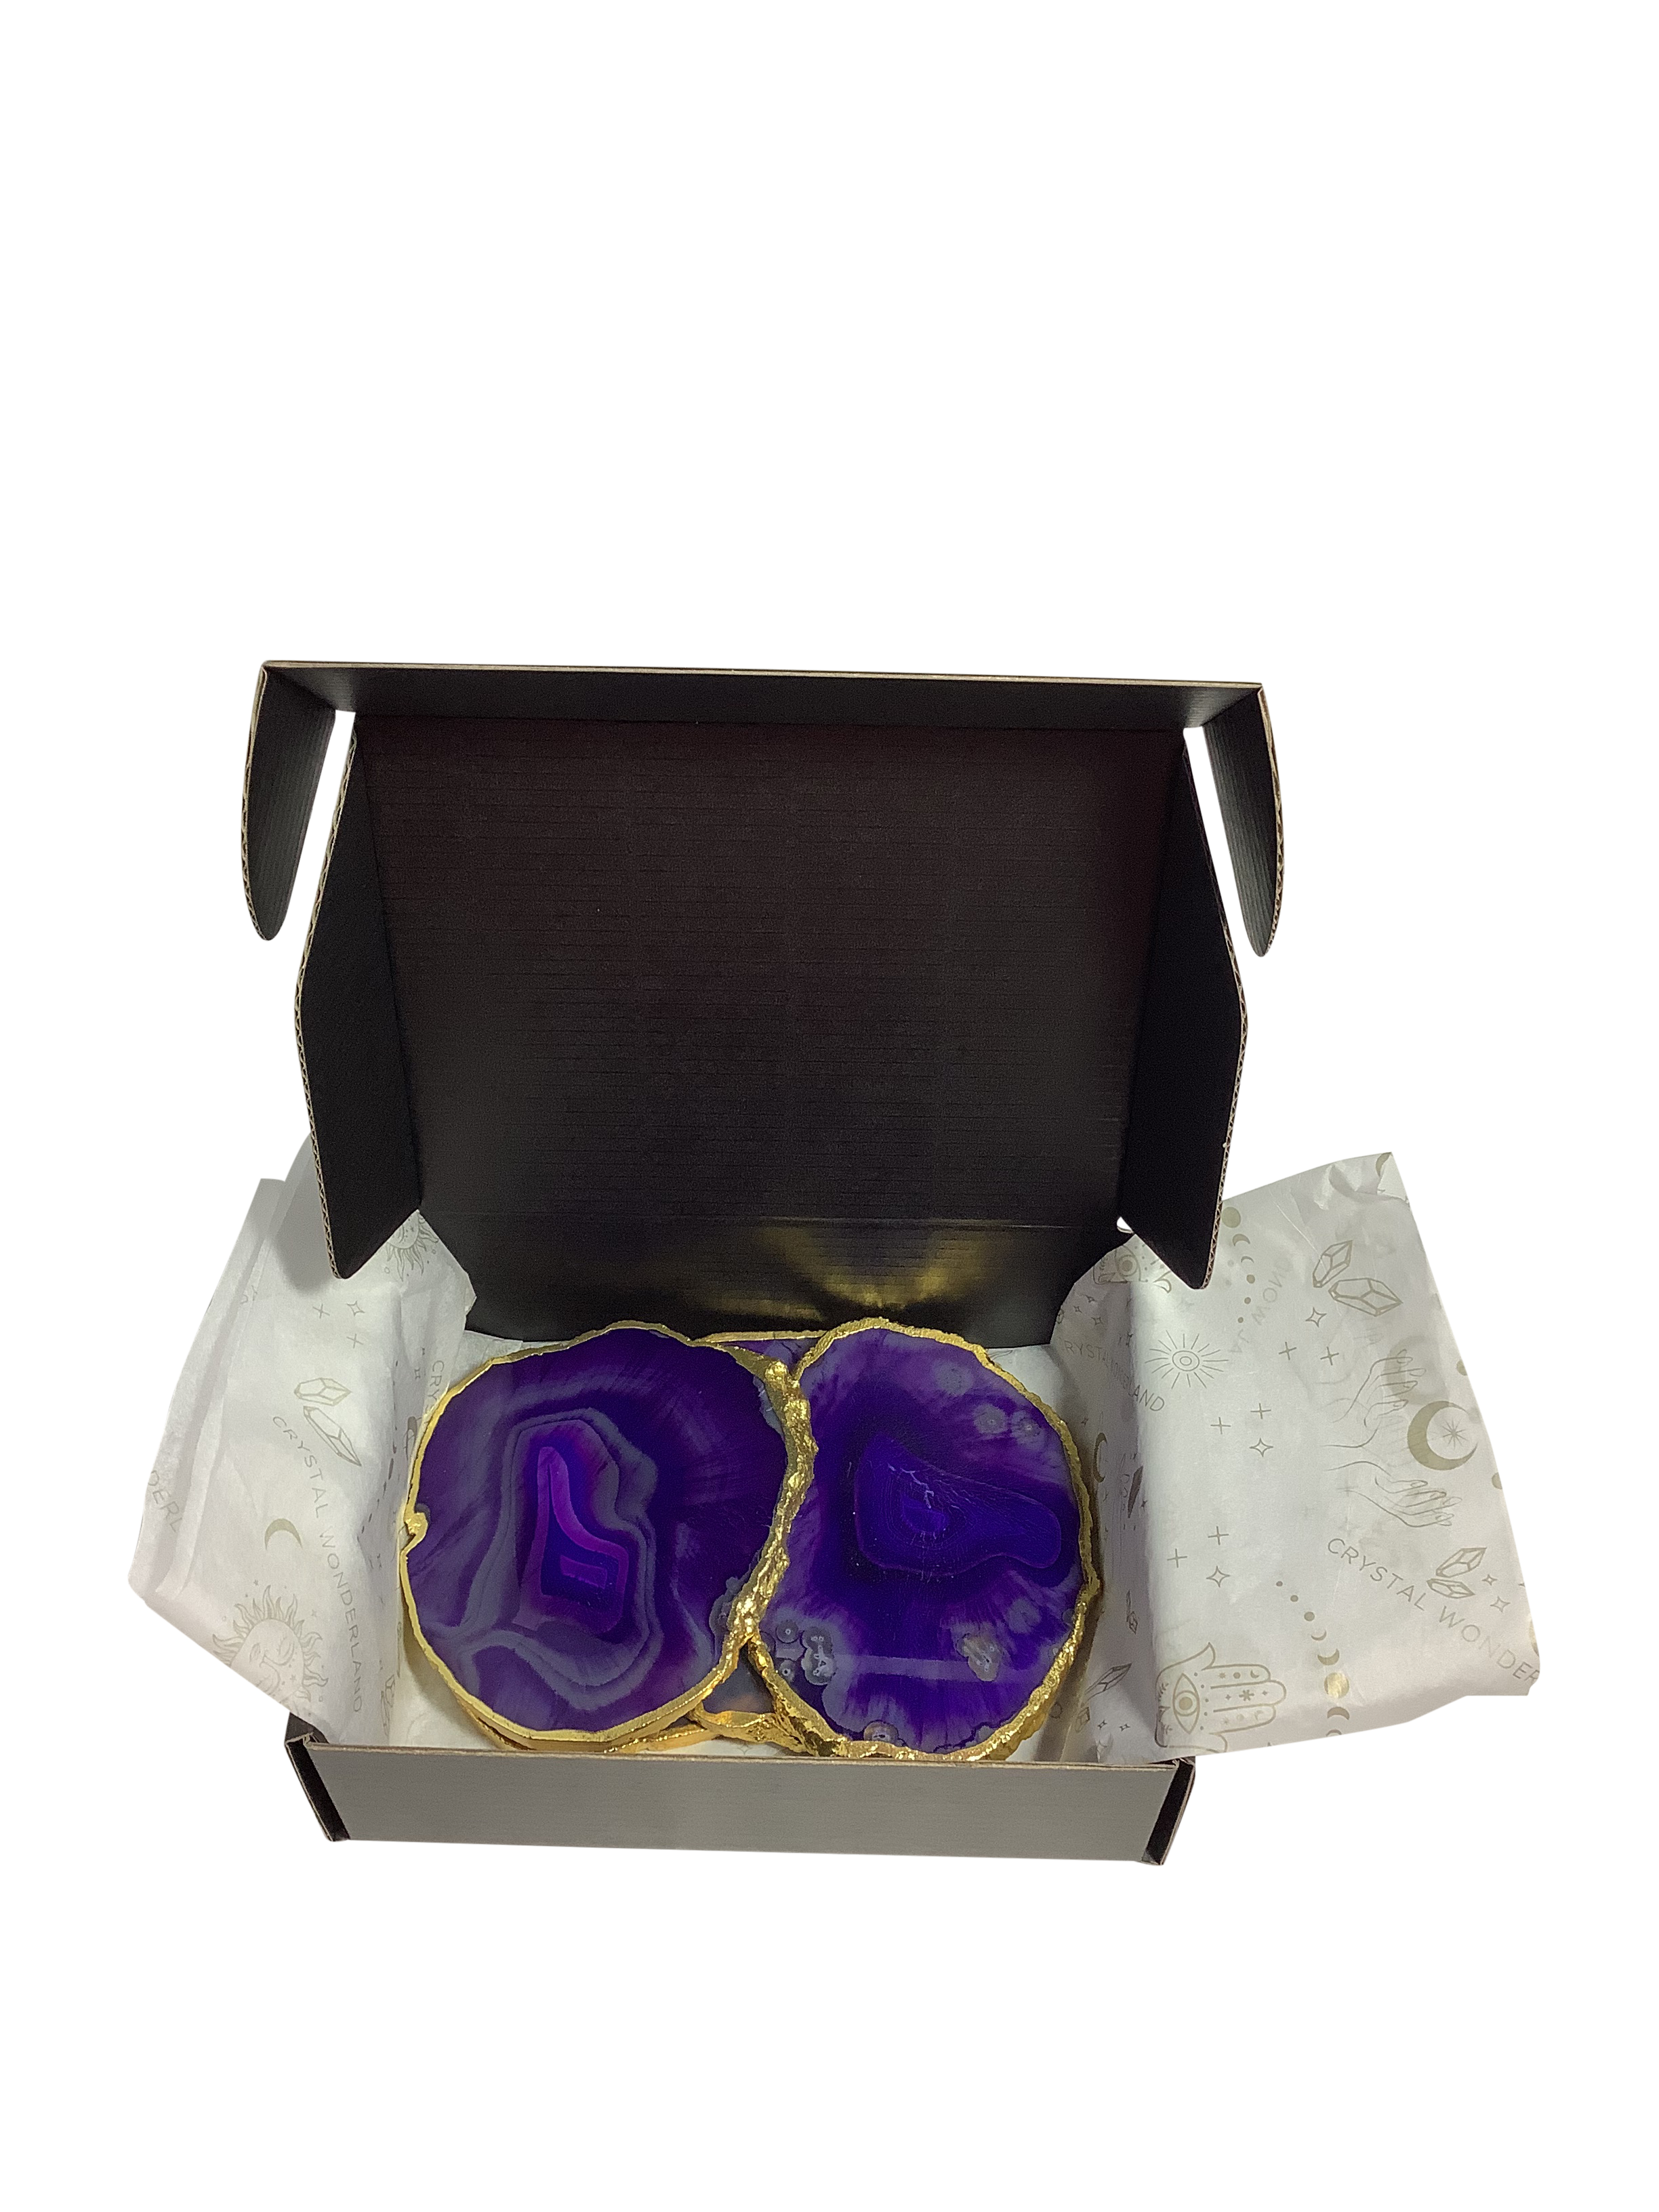 Purple Dyed Agate Coaster Natural Shape Gold - 4 Pieces